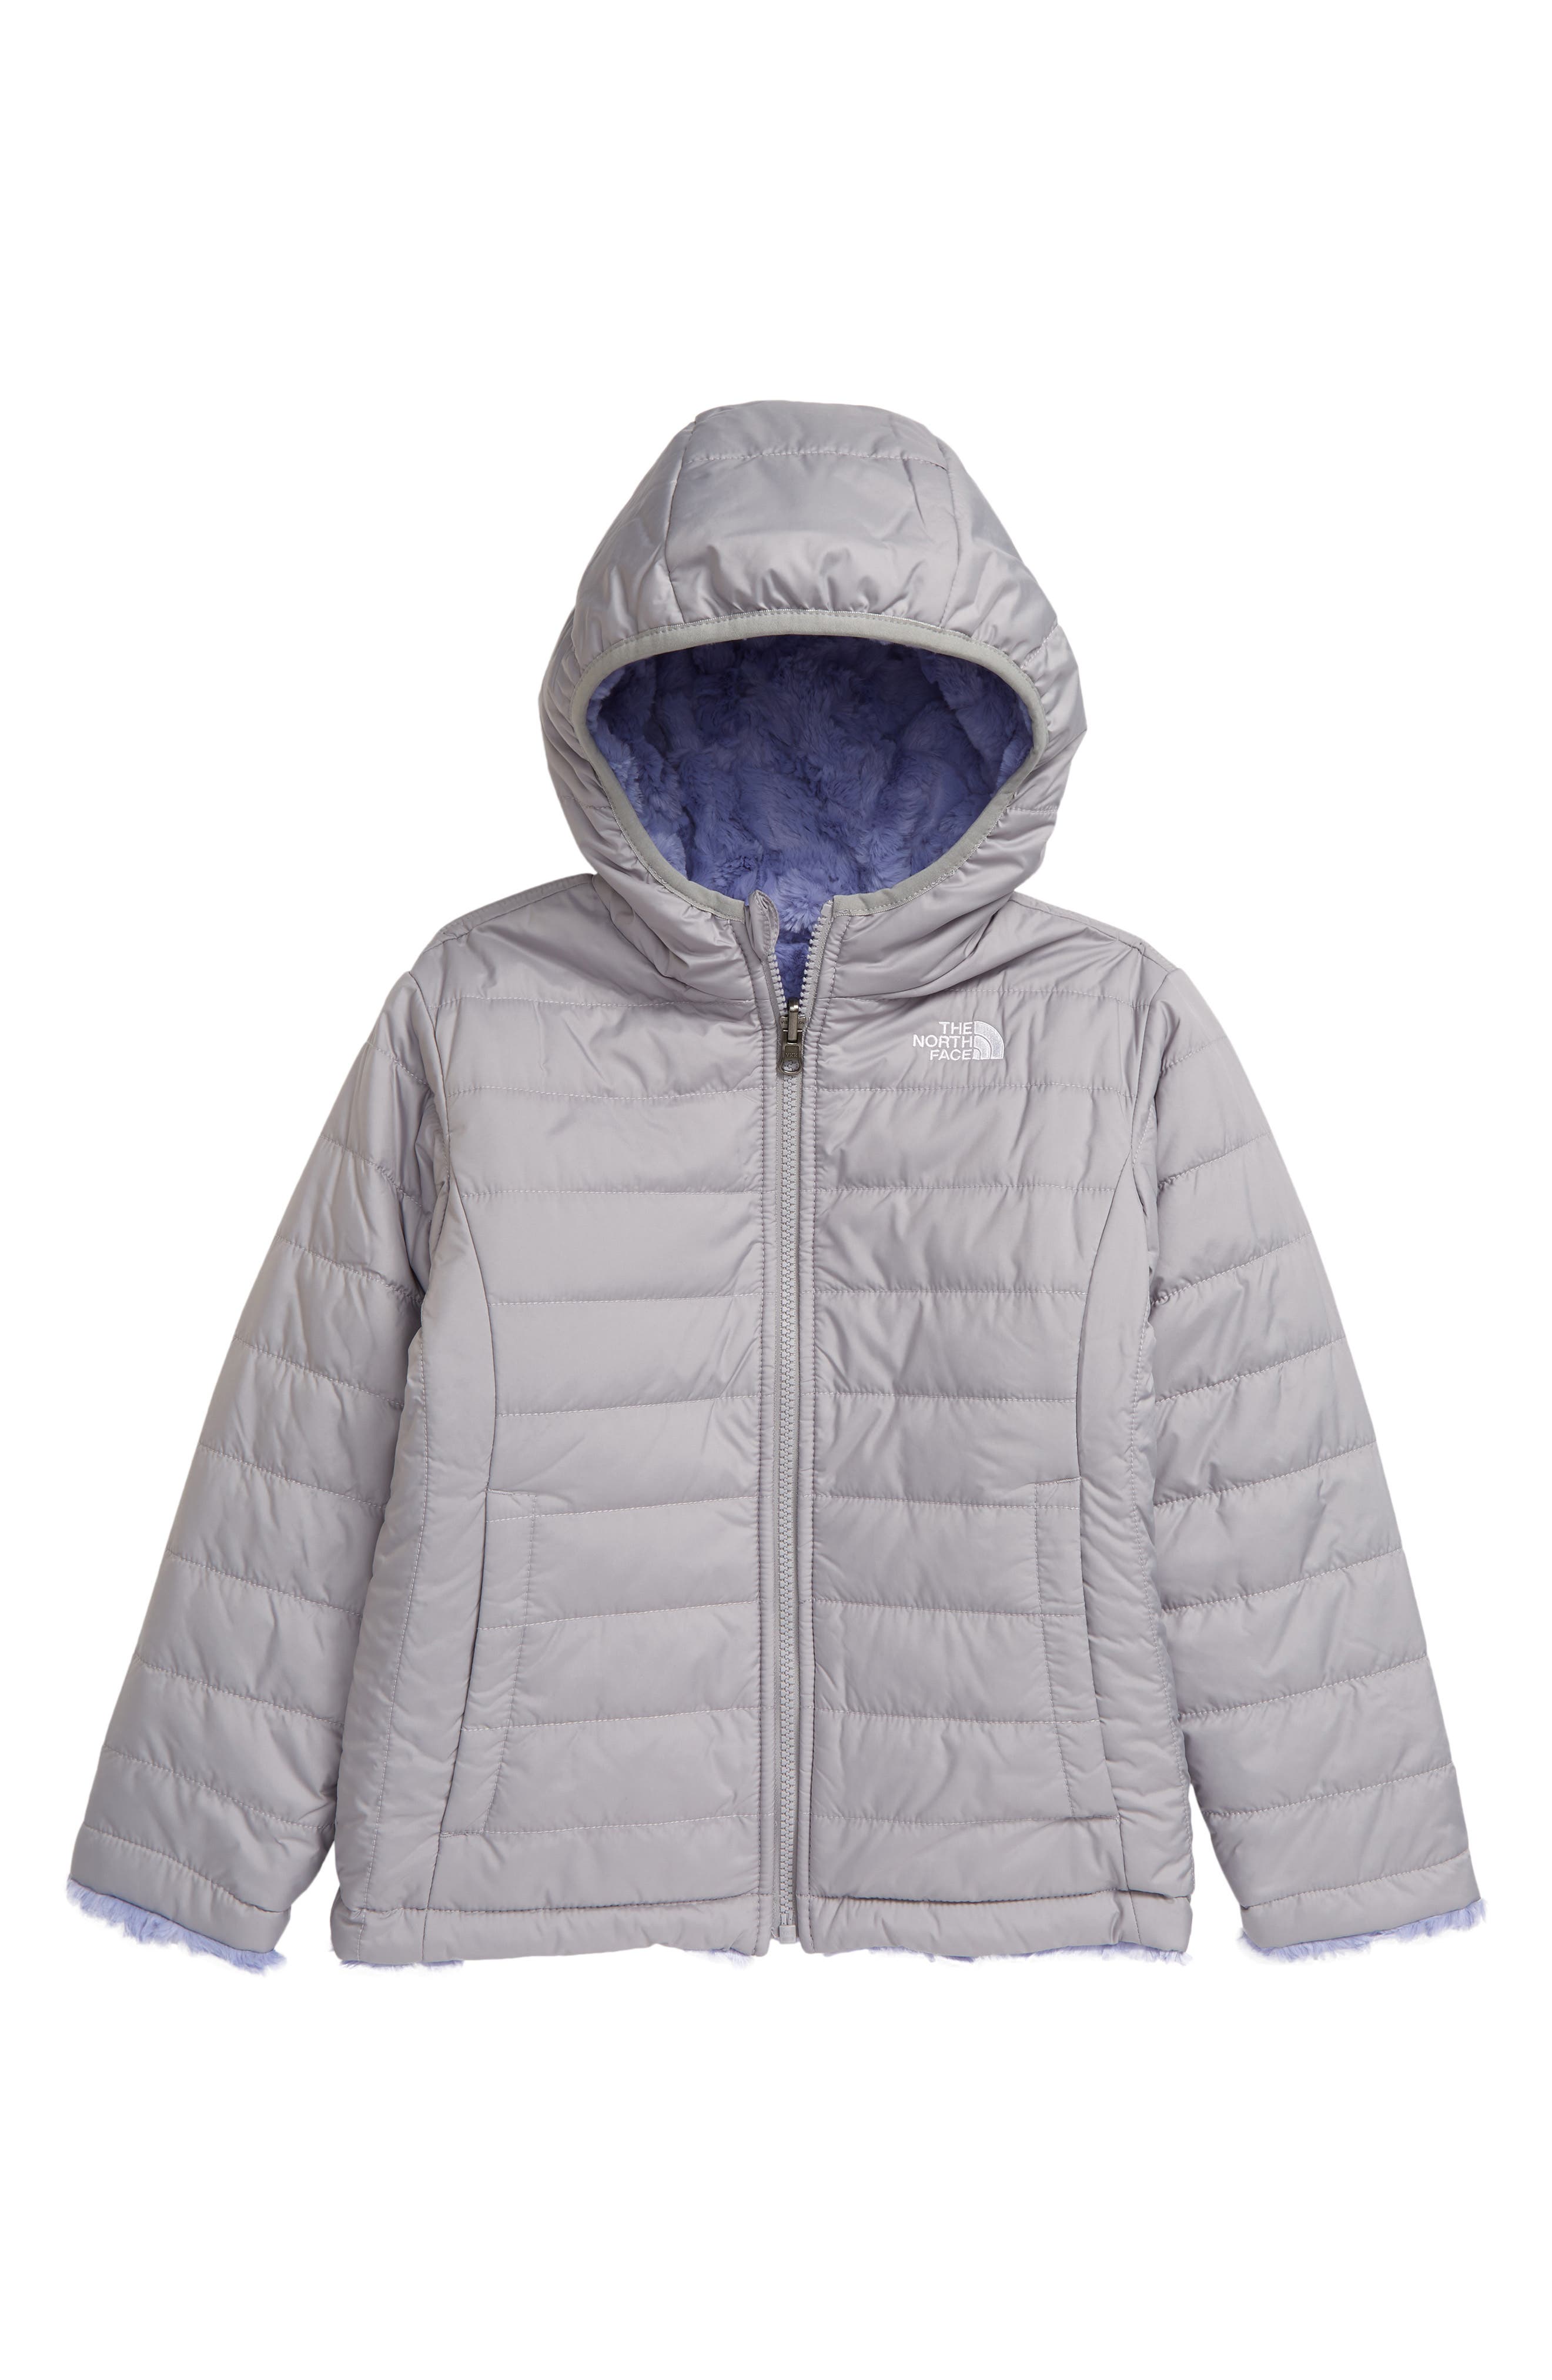 The North Face Kids' Mossbud Swirl 